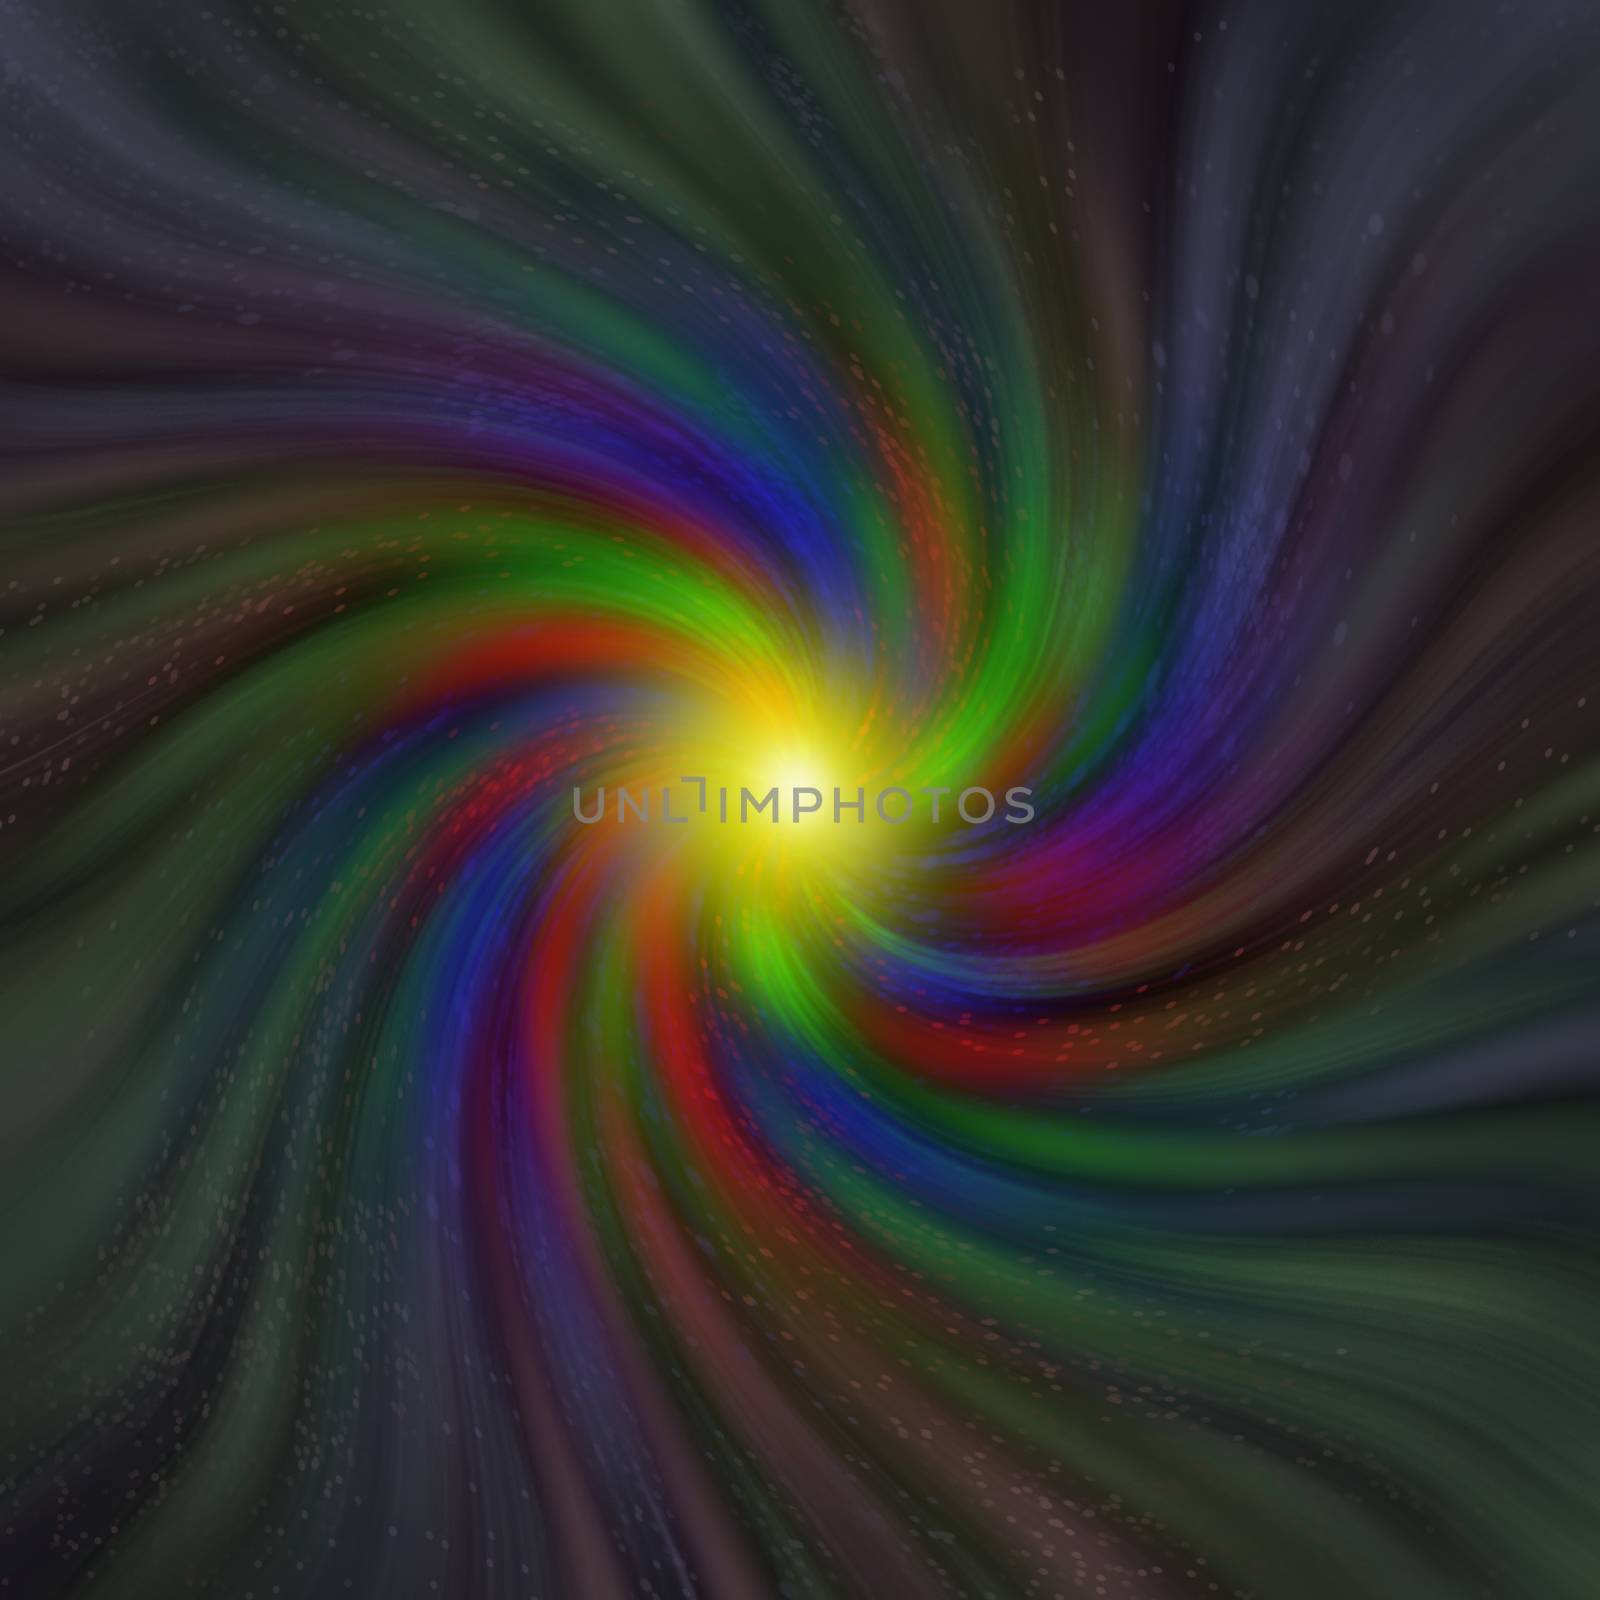 Swirling vortex of colors with varying saturation